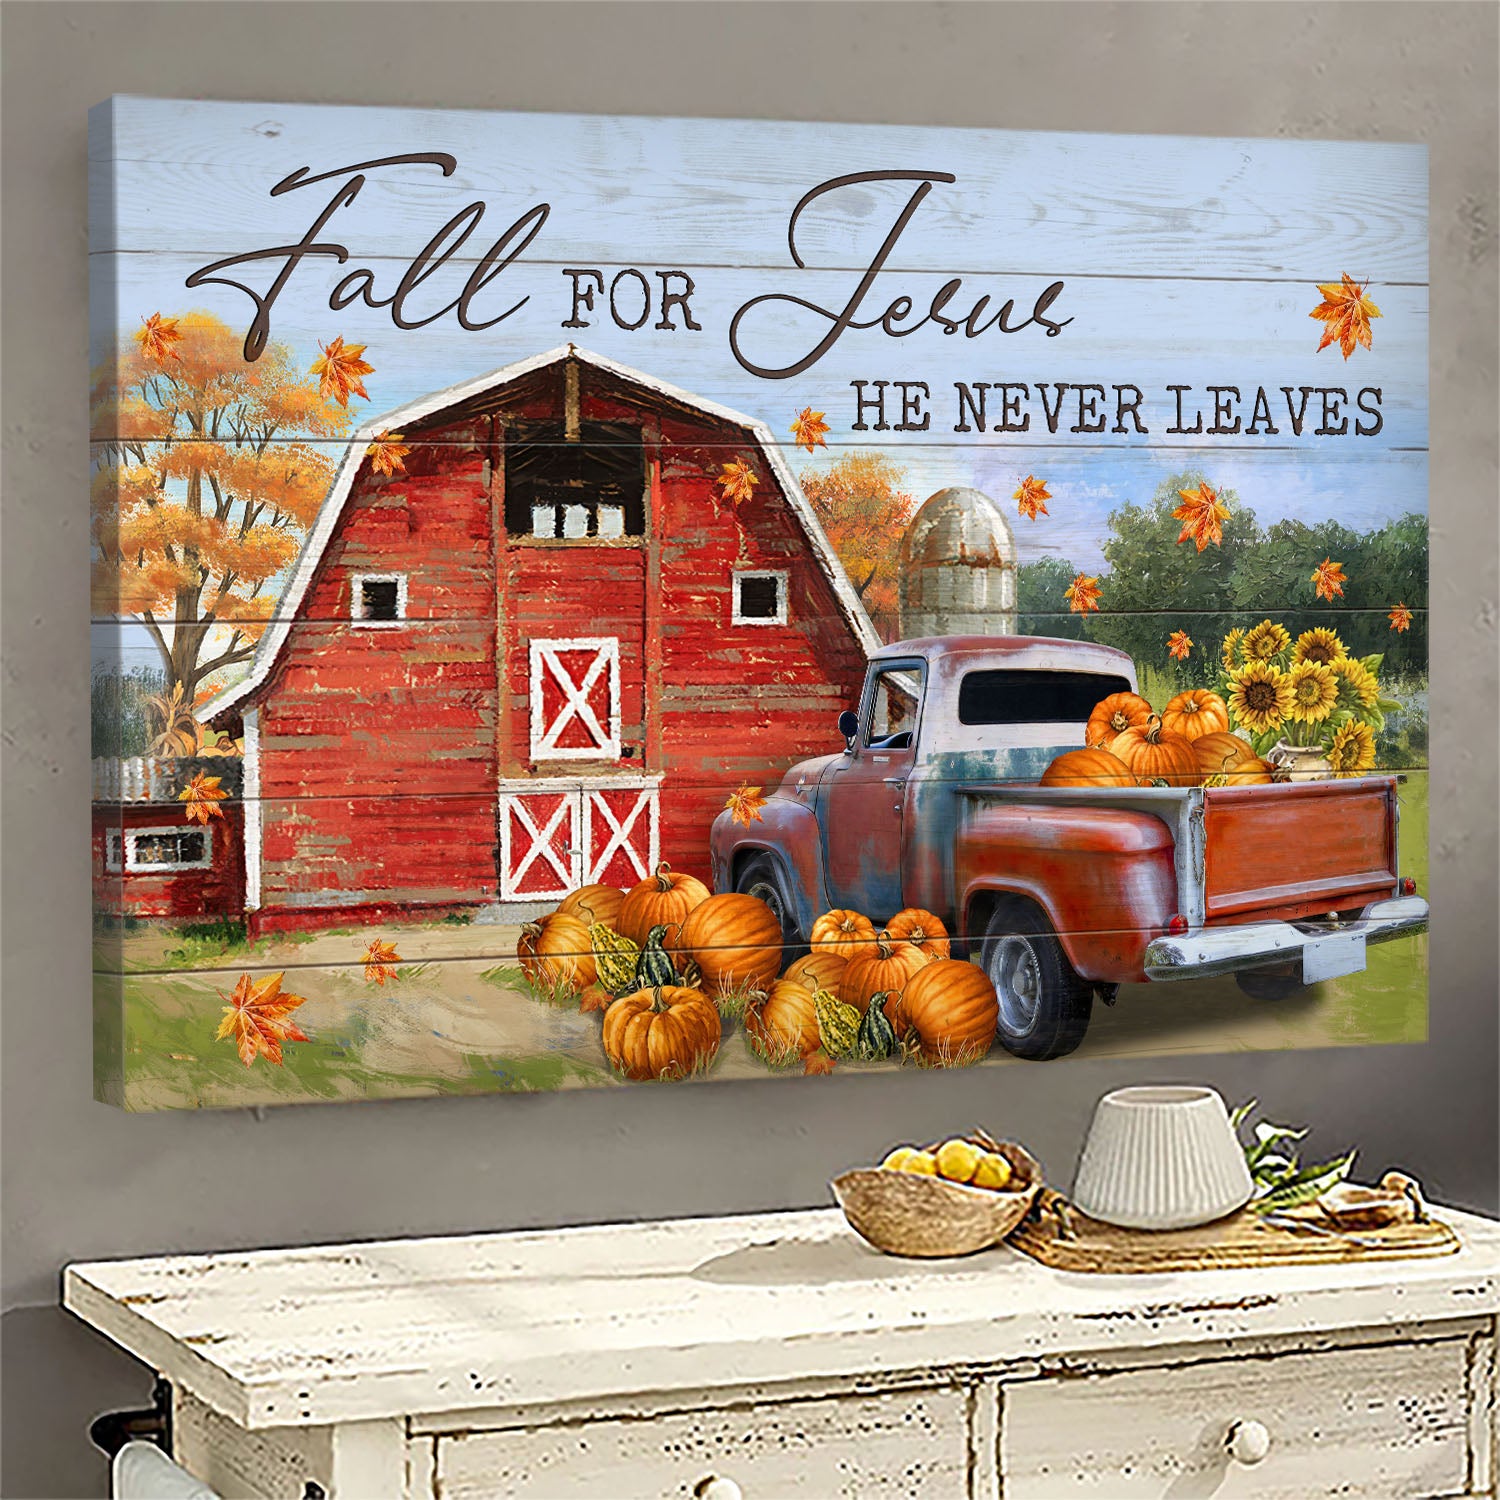 Red barn, Pumpkins field, Lively countryside, Fall for Jesus, he never leaves - Jesus Landscape Canvas Prints, Wall Art